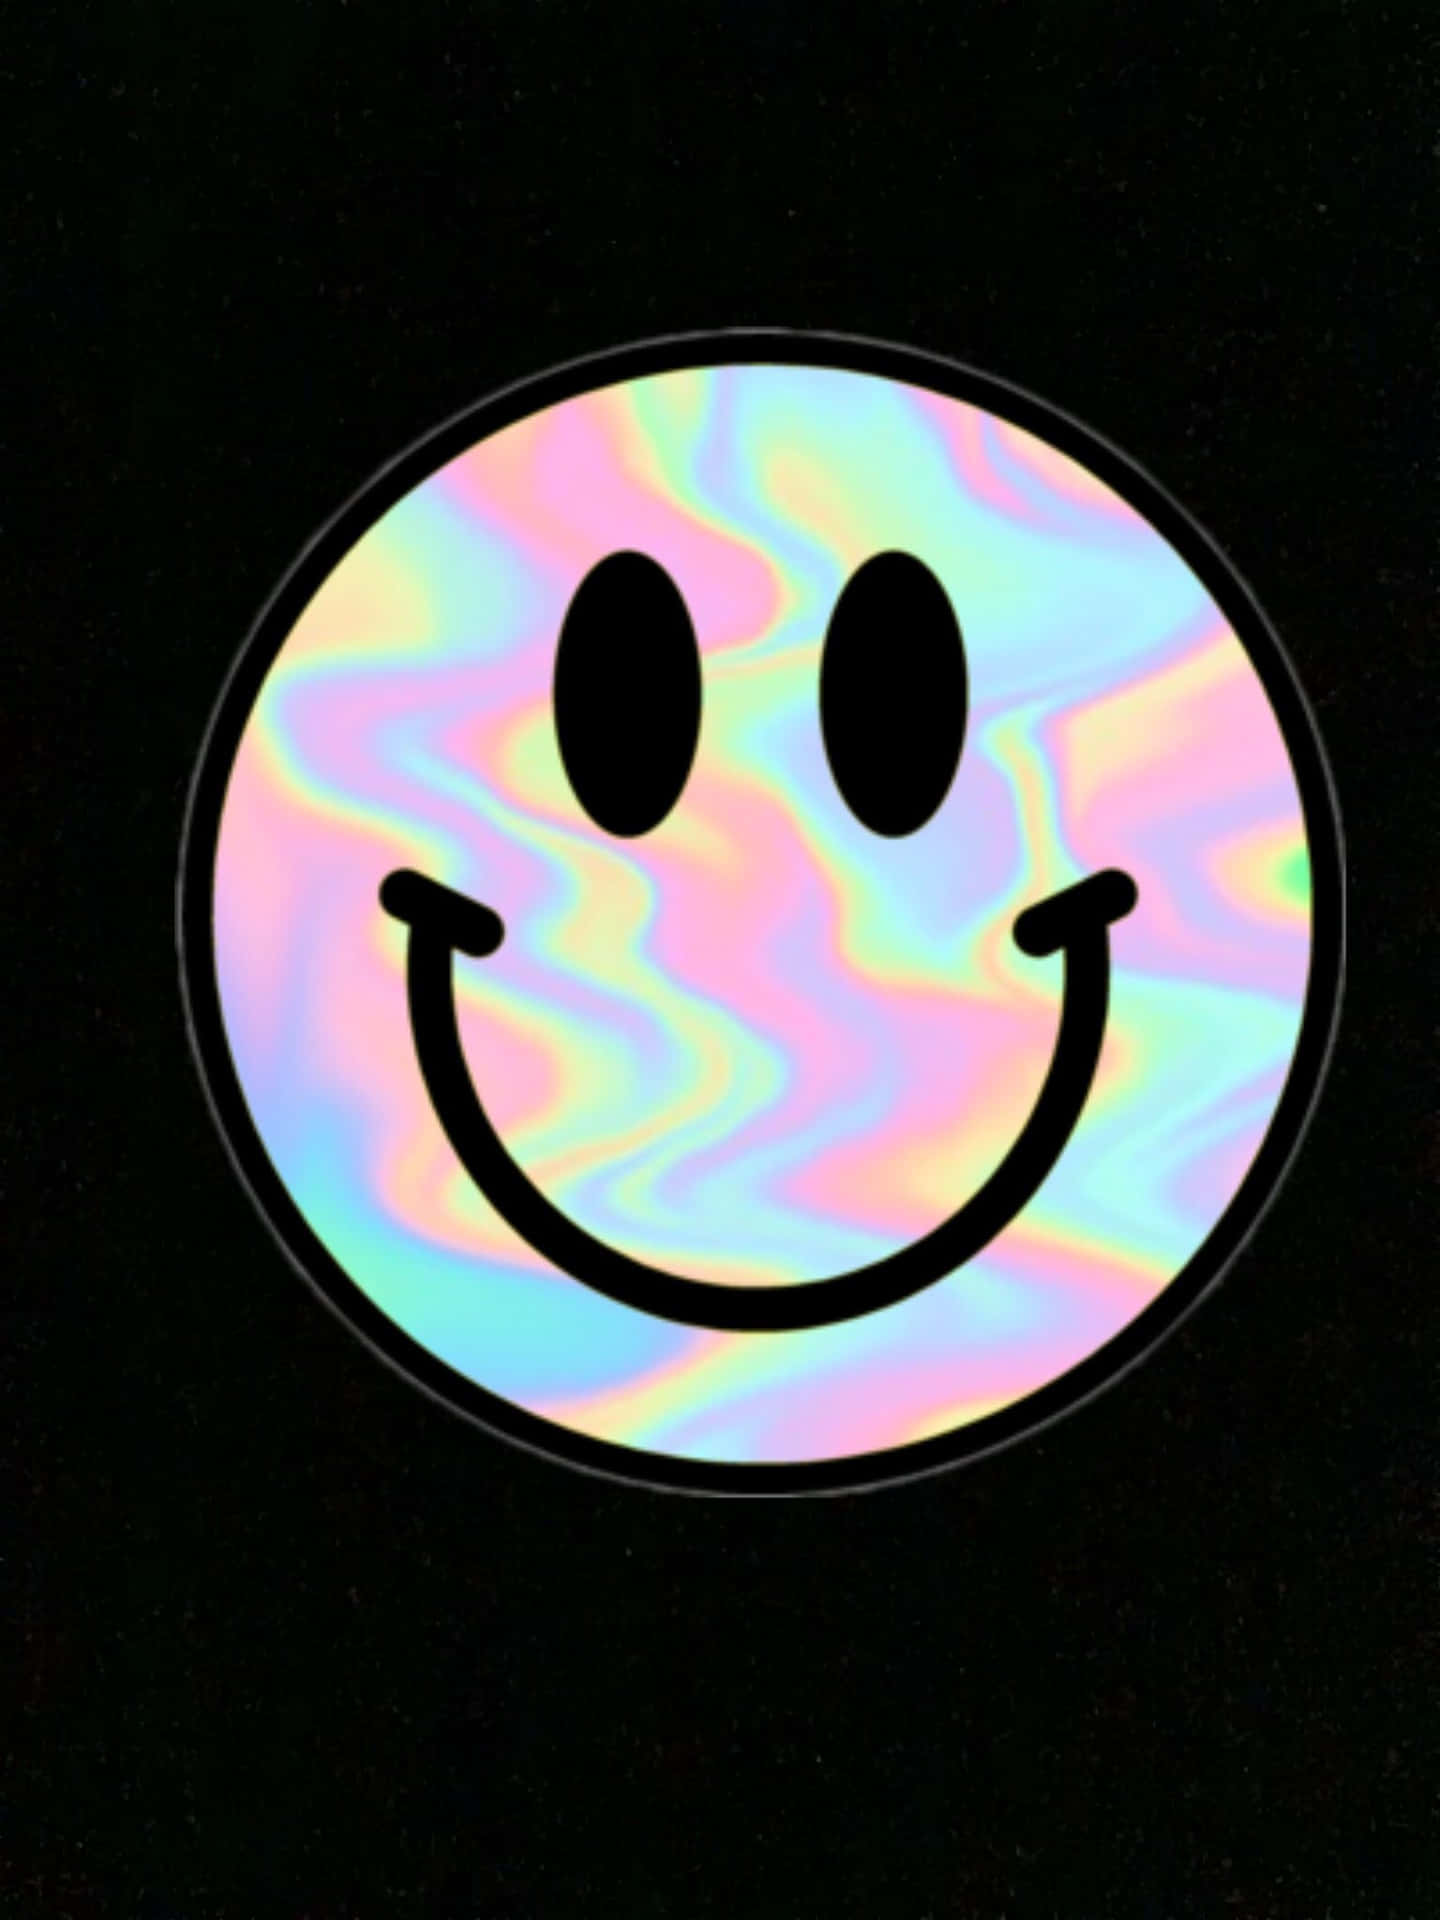 smiley face transparent background tumblr